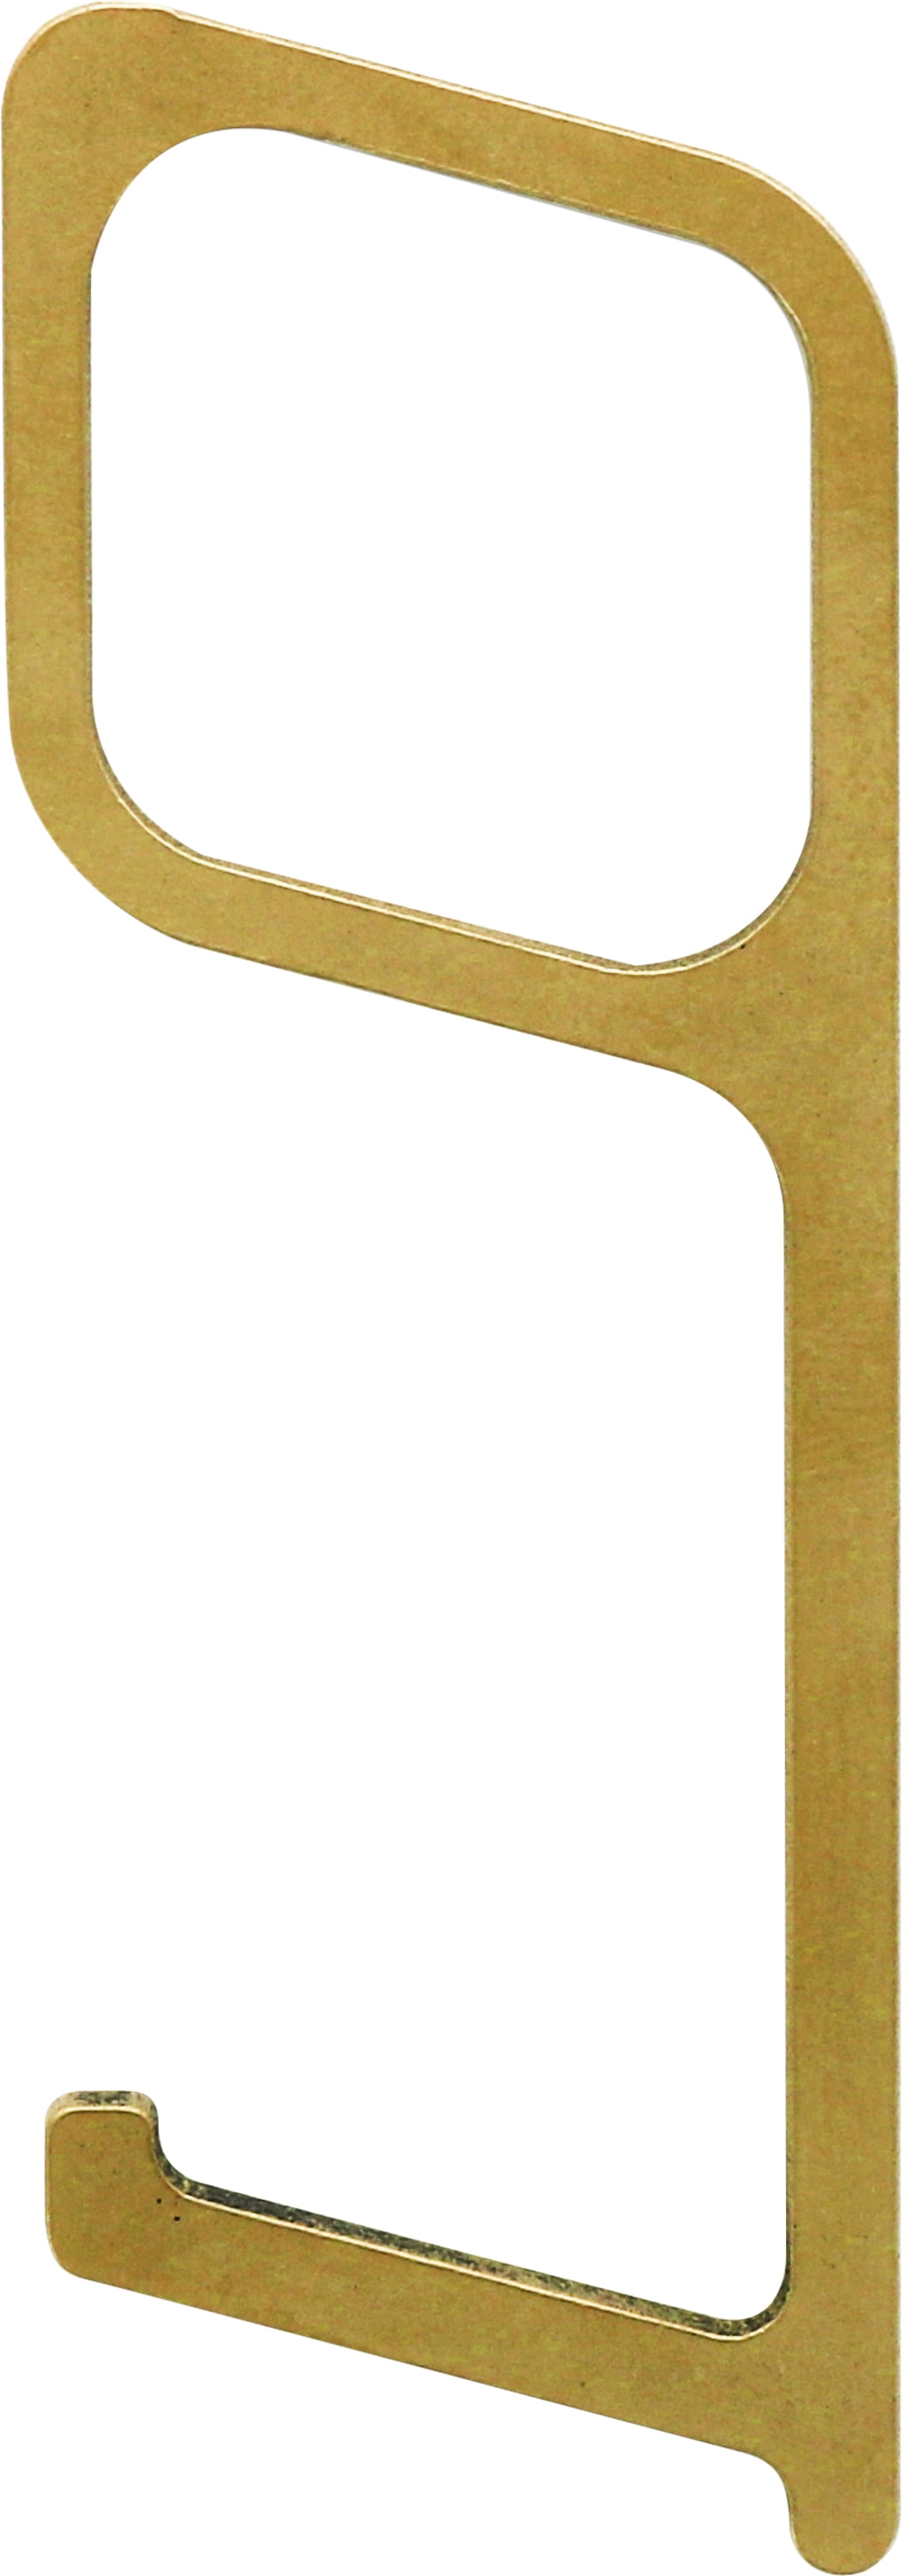 Minute Key No Touch Tool Solid Brass 9976268 for sale online 